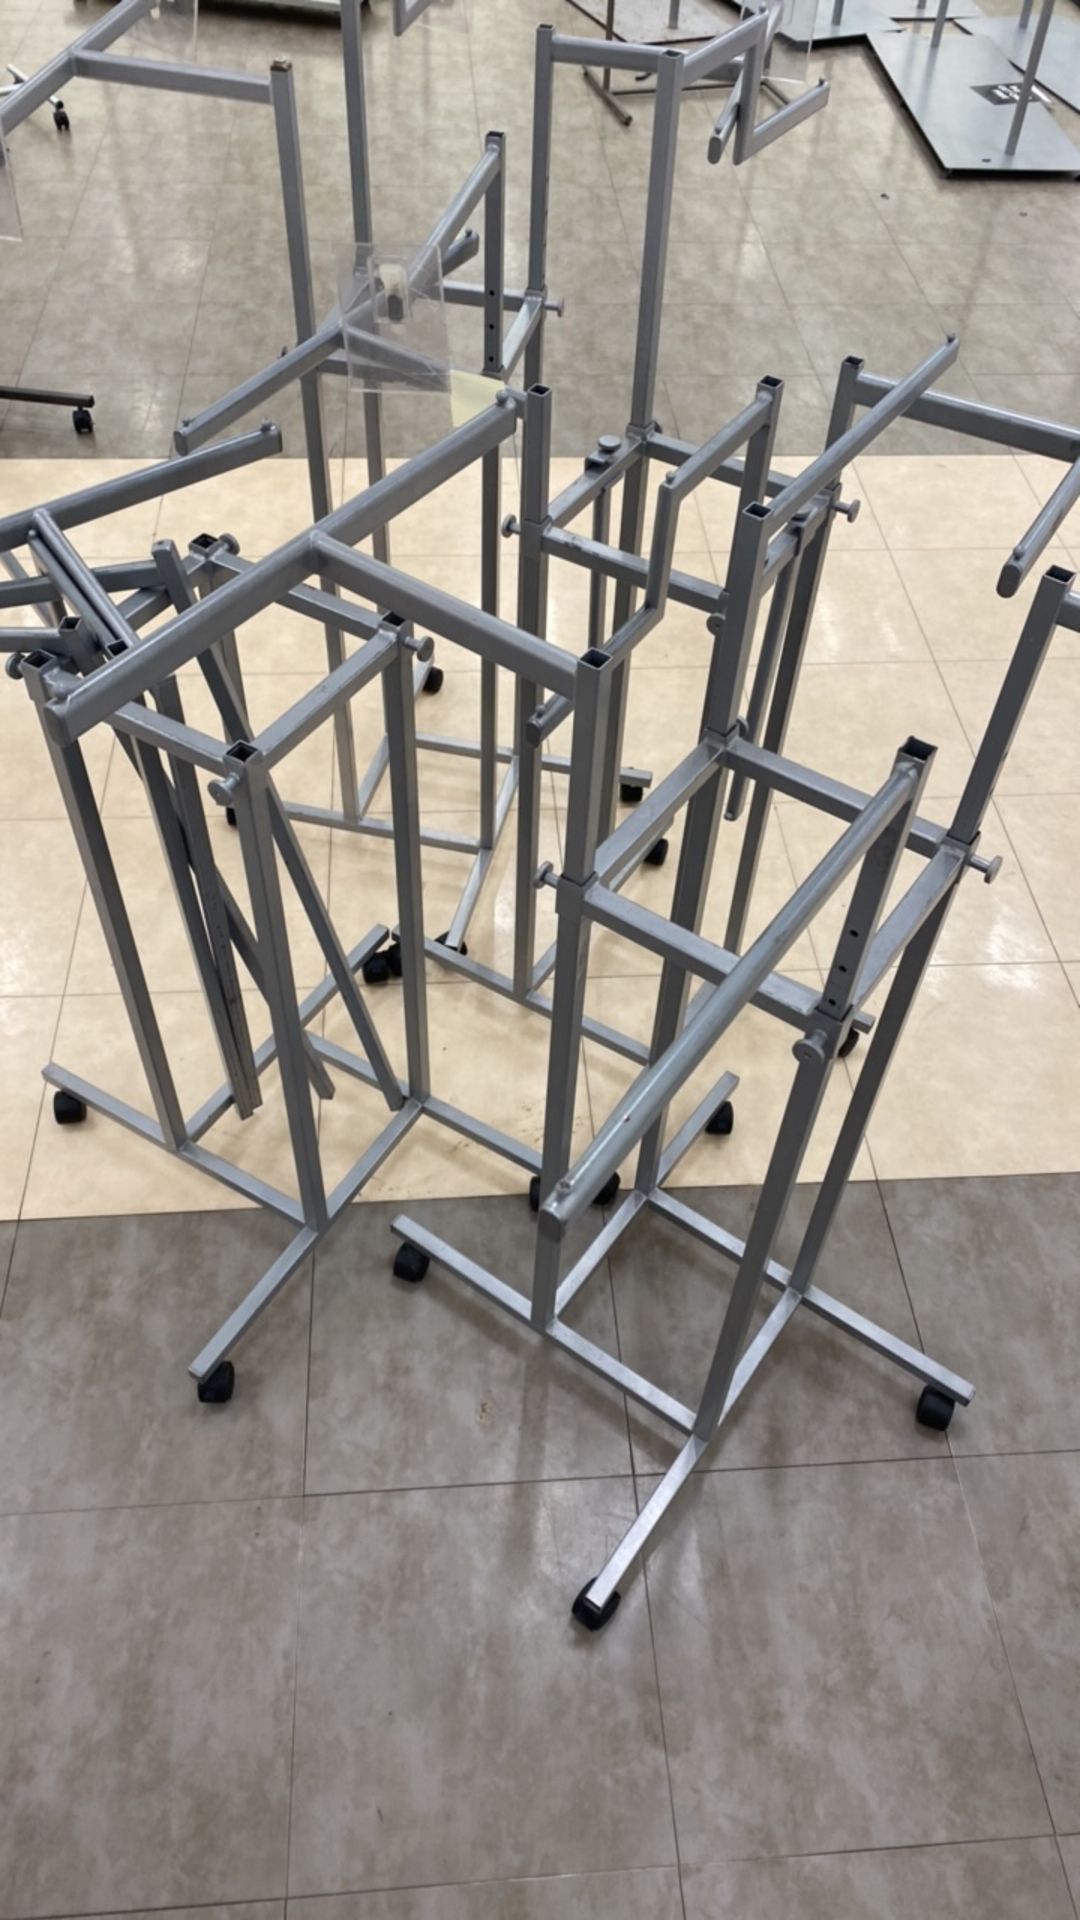 4 way adjustable clothes stand on wheels x 4 - Image 2 of 2